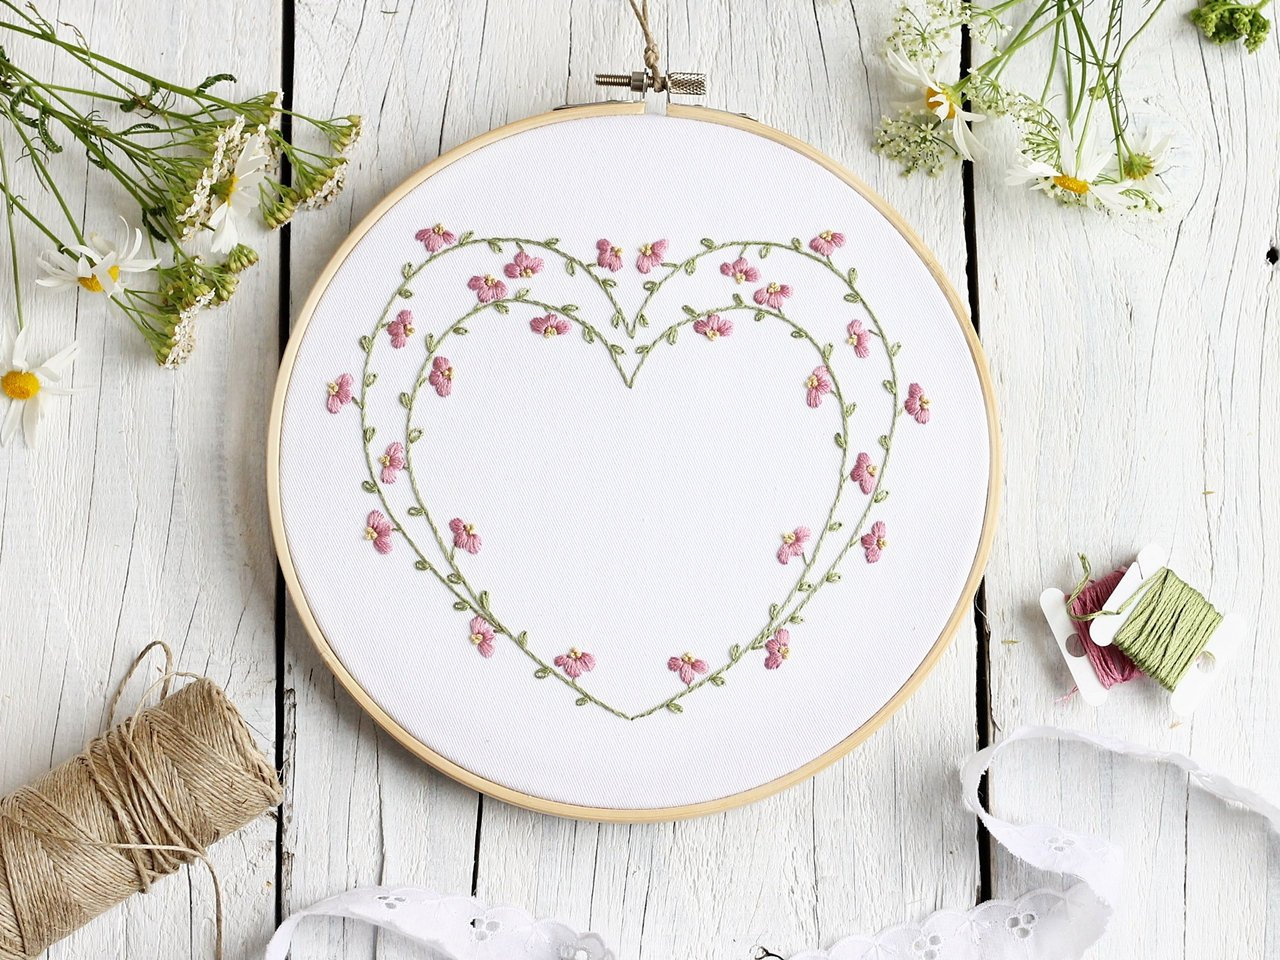 Wedding Embroidery Patterns Floral Hand Embroidery Patterns Heart Embroidery Pdf Diy Wedding Gift